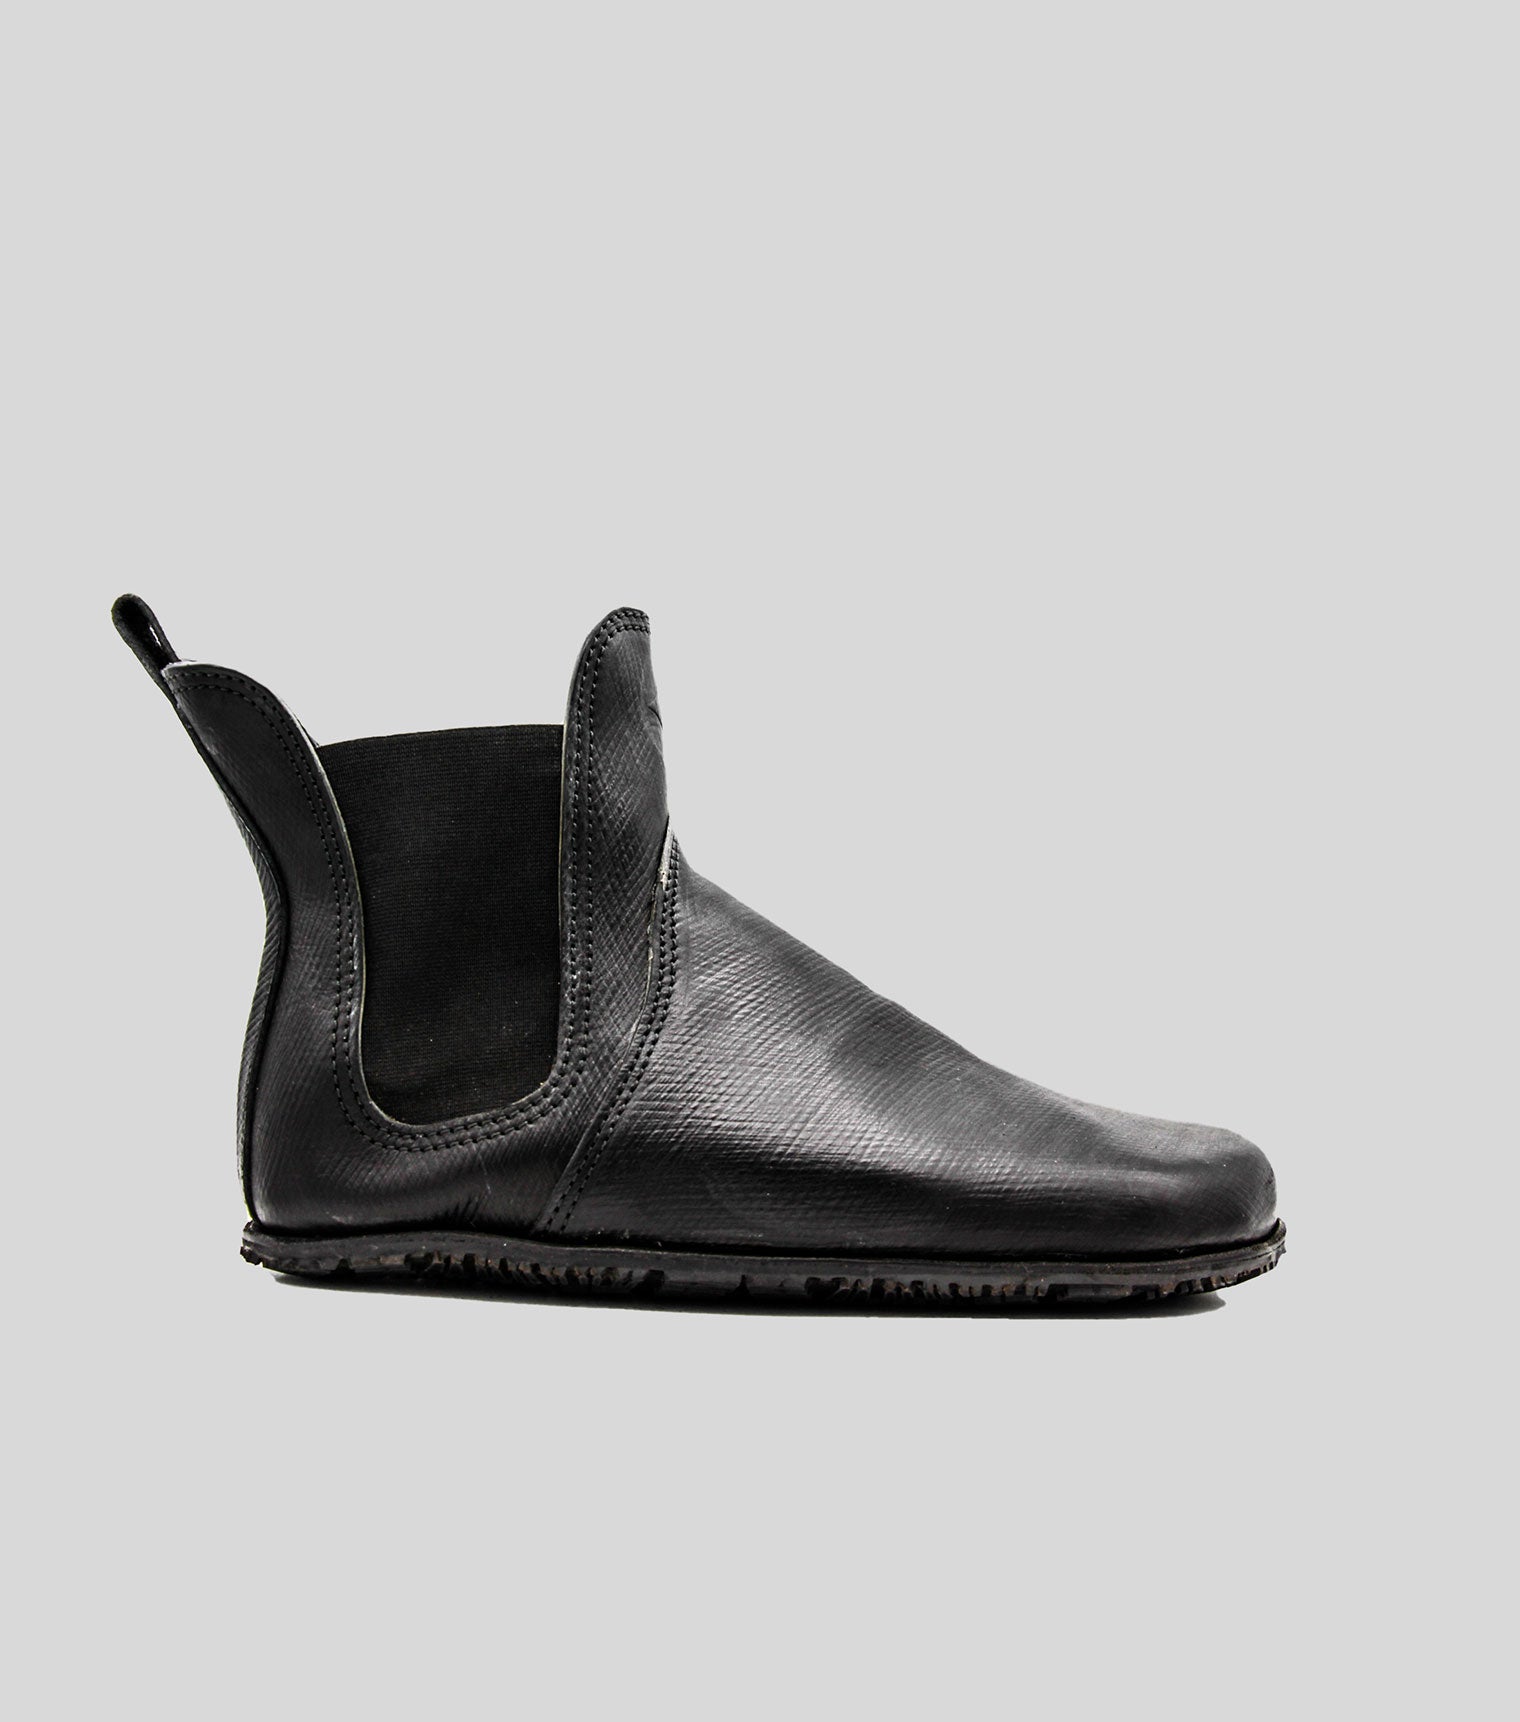 Barefoot Chelsea Boots in Black 'Baker's Russian' Calf Leather